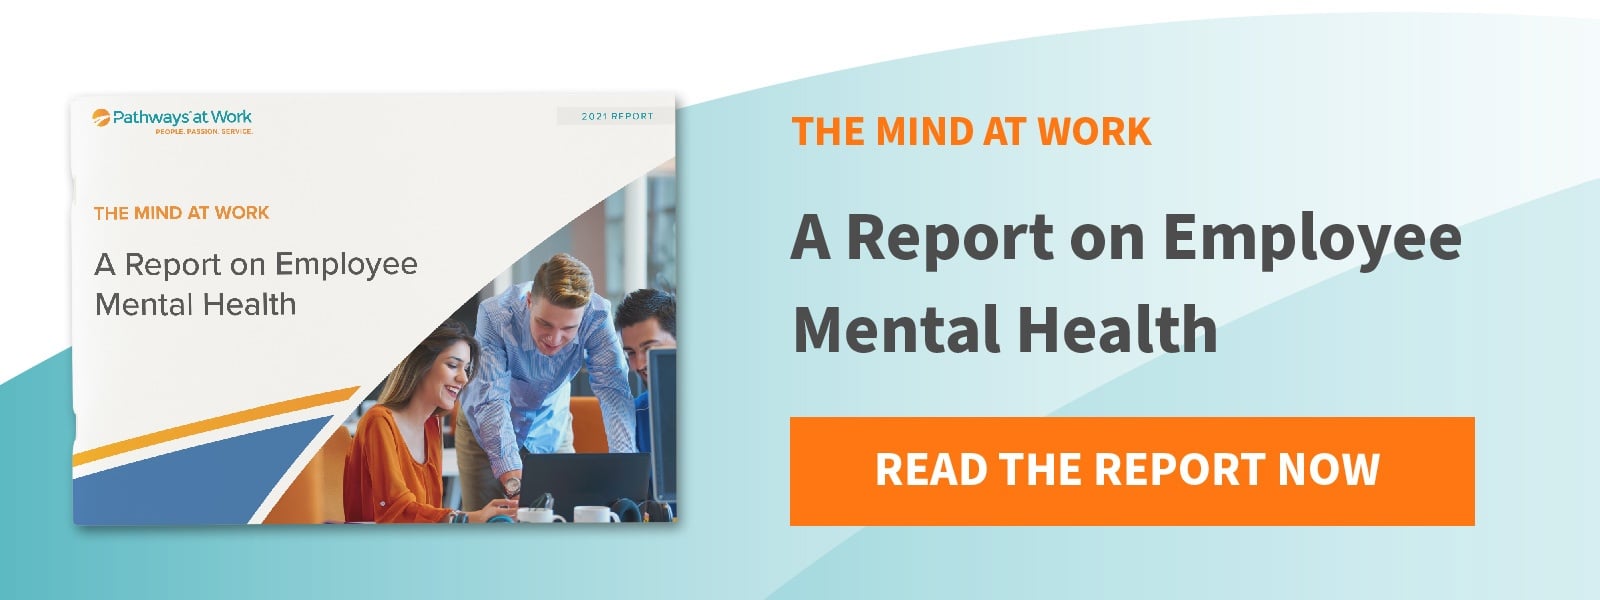 Workplace Mental Health and Well-Being Blog, Pathways at Work